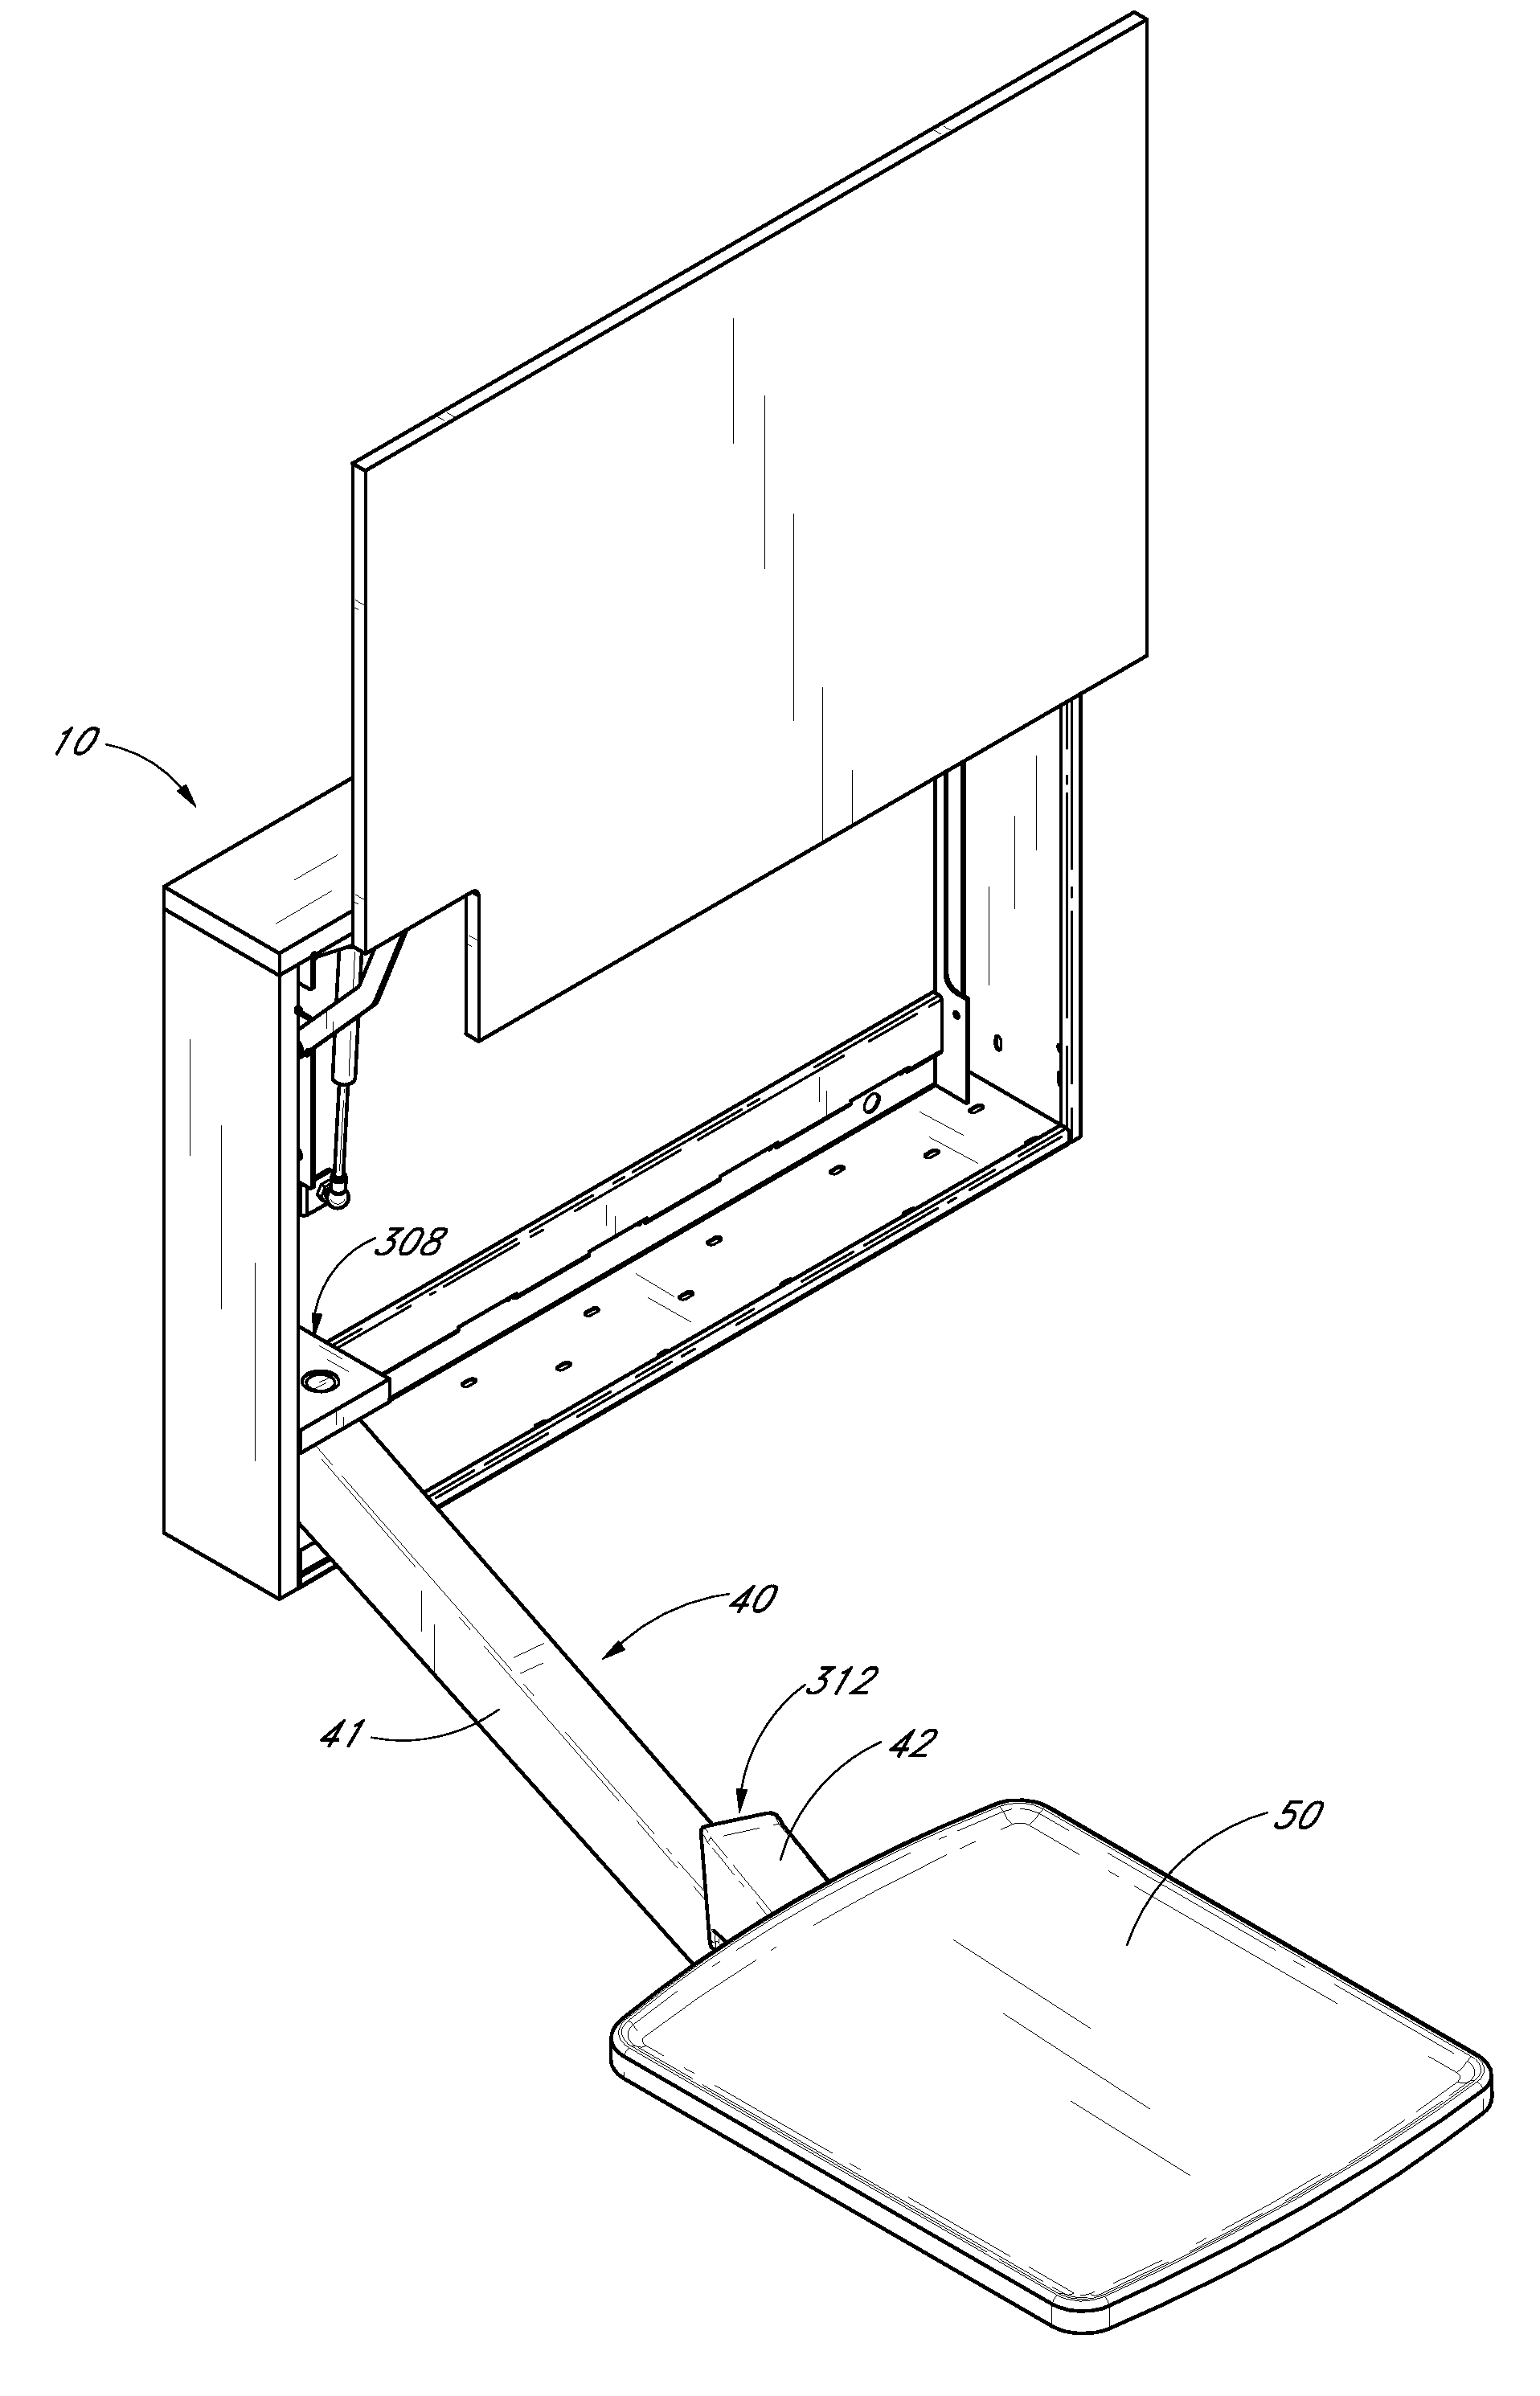 Storage unit with extension mechanism